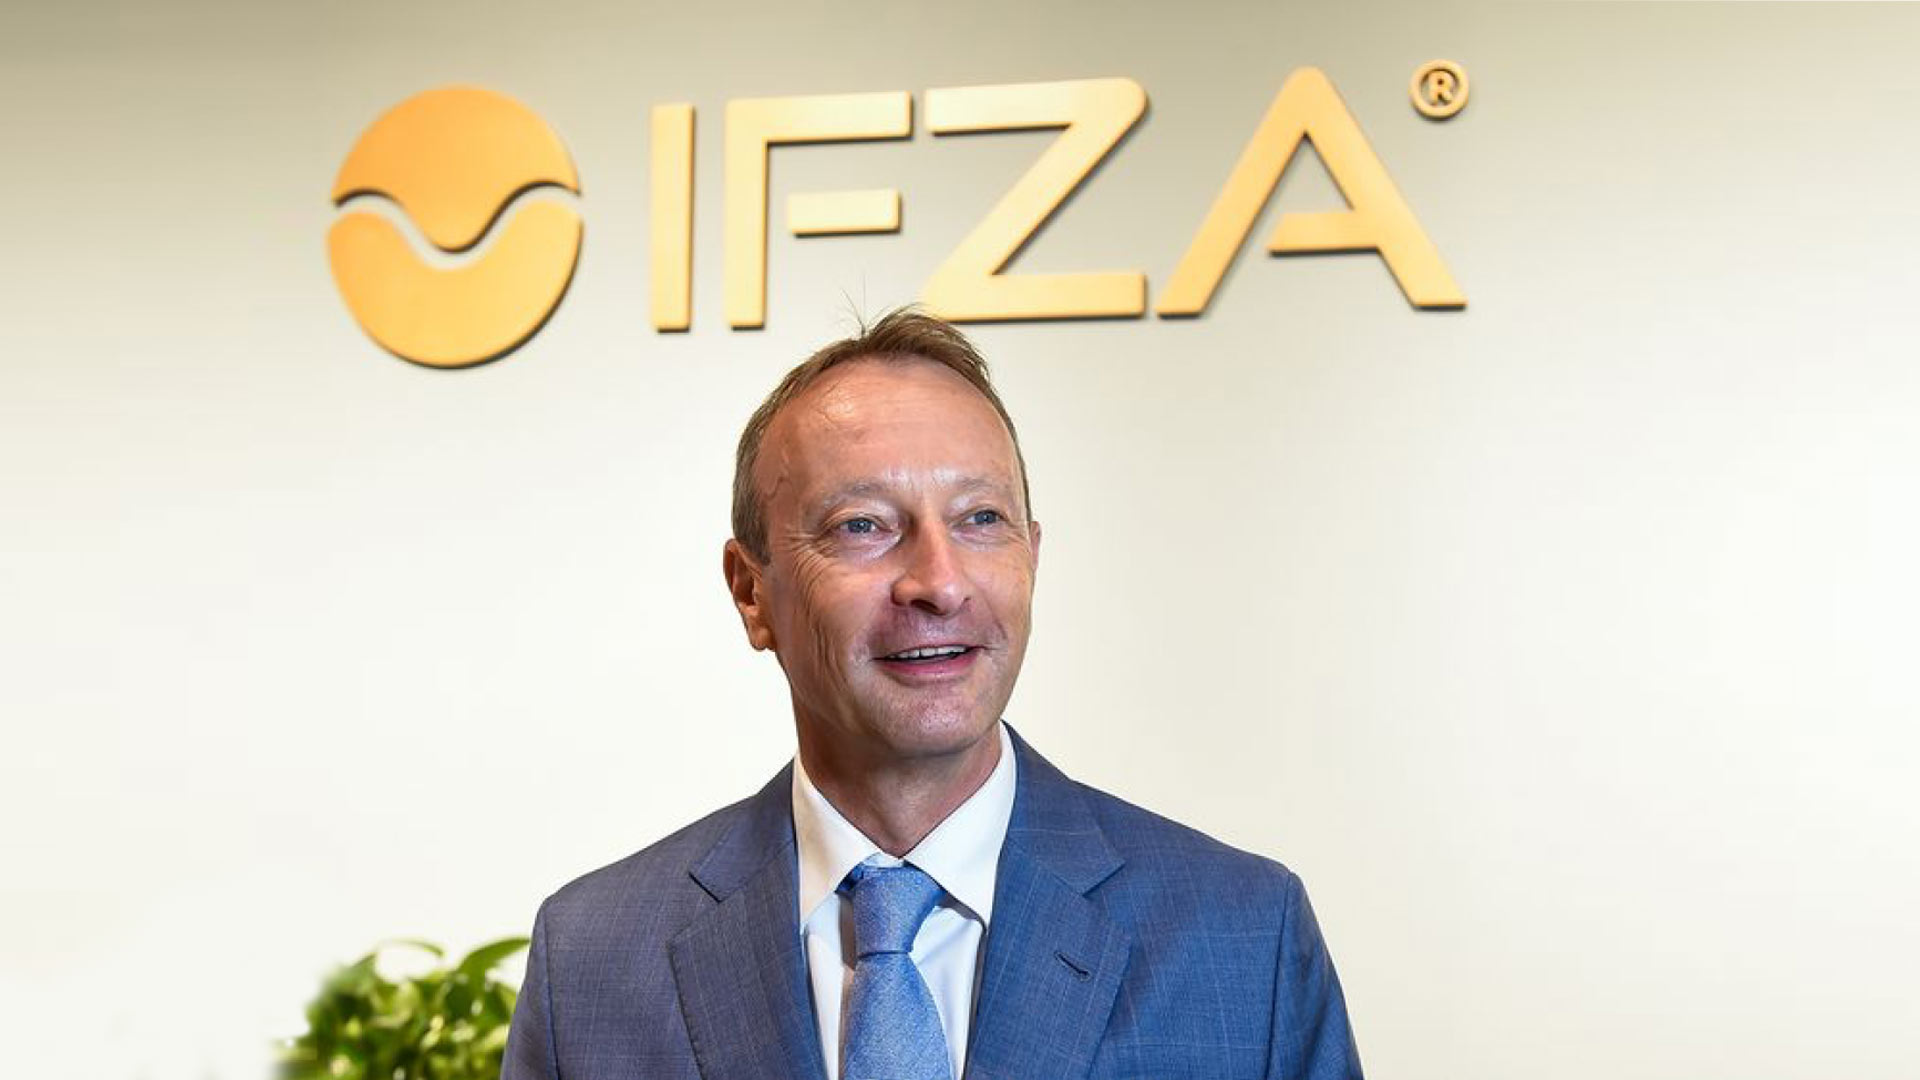 UAE’s Free Zone sector undergoing transition phase: IFZA CEO